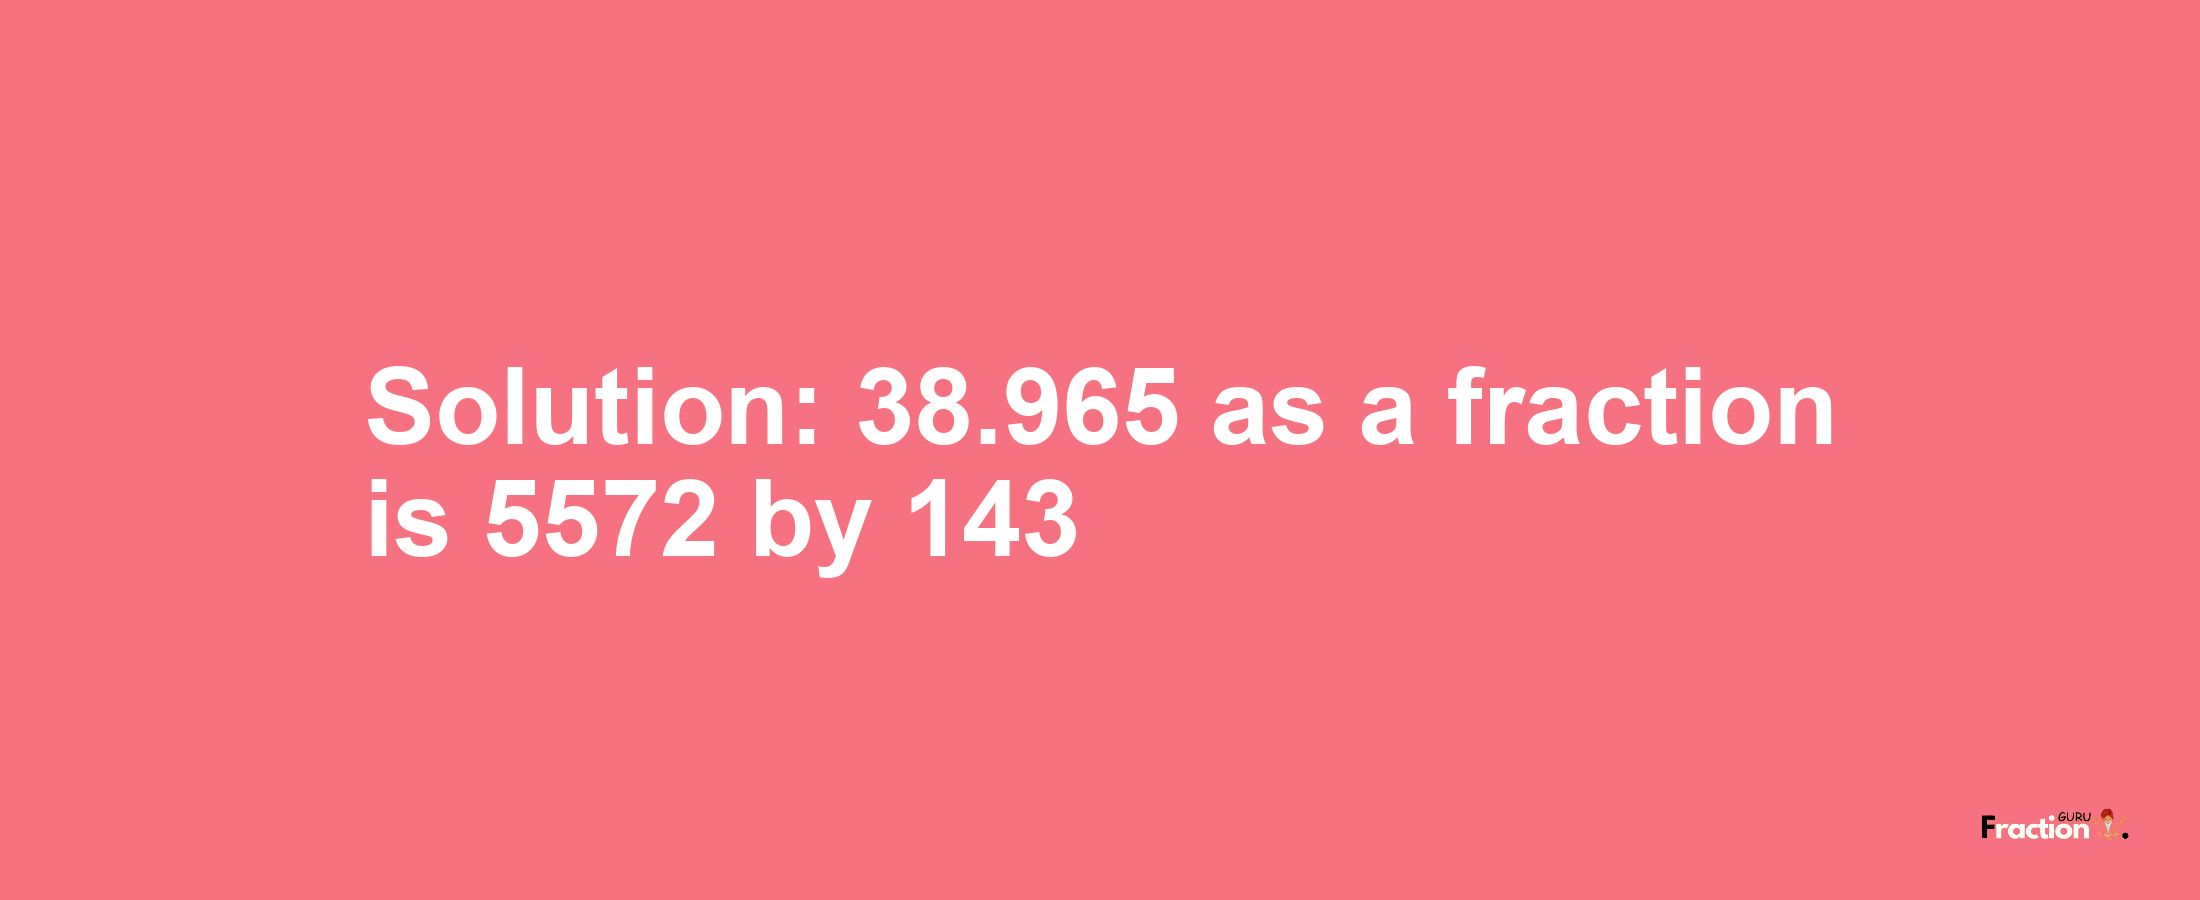 Solution:38.965 as a fraction is 5572/143